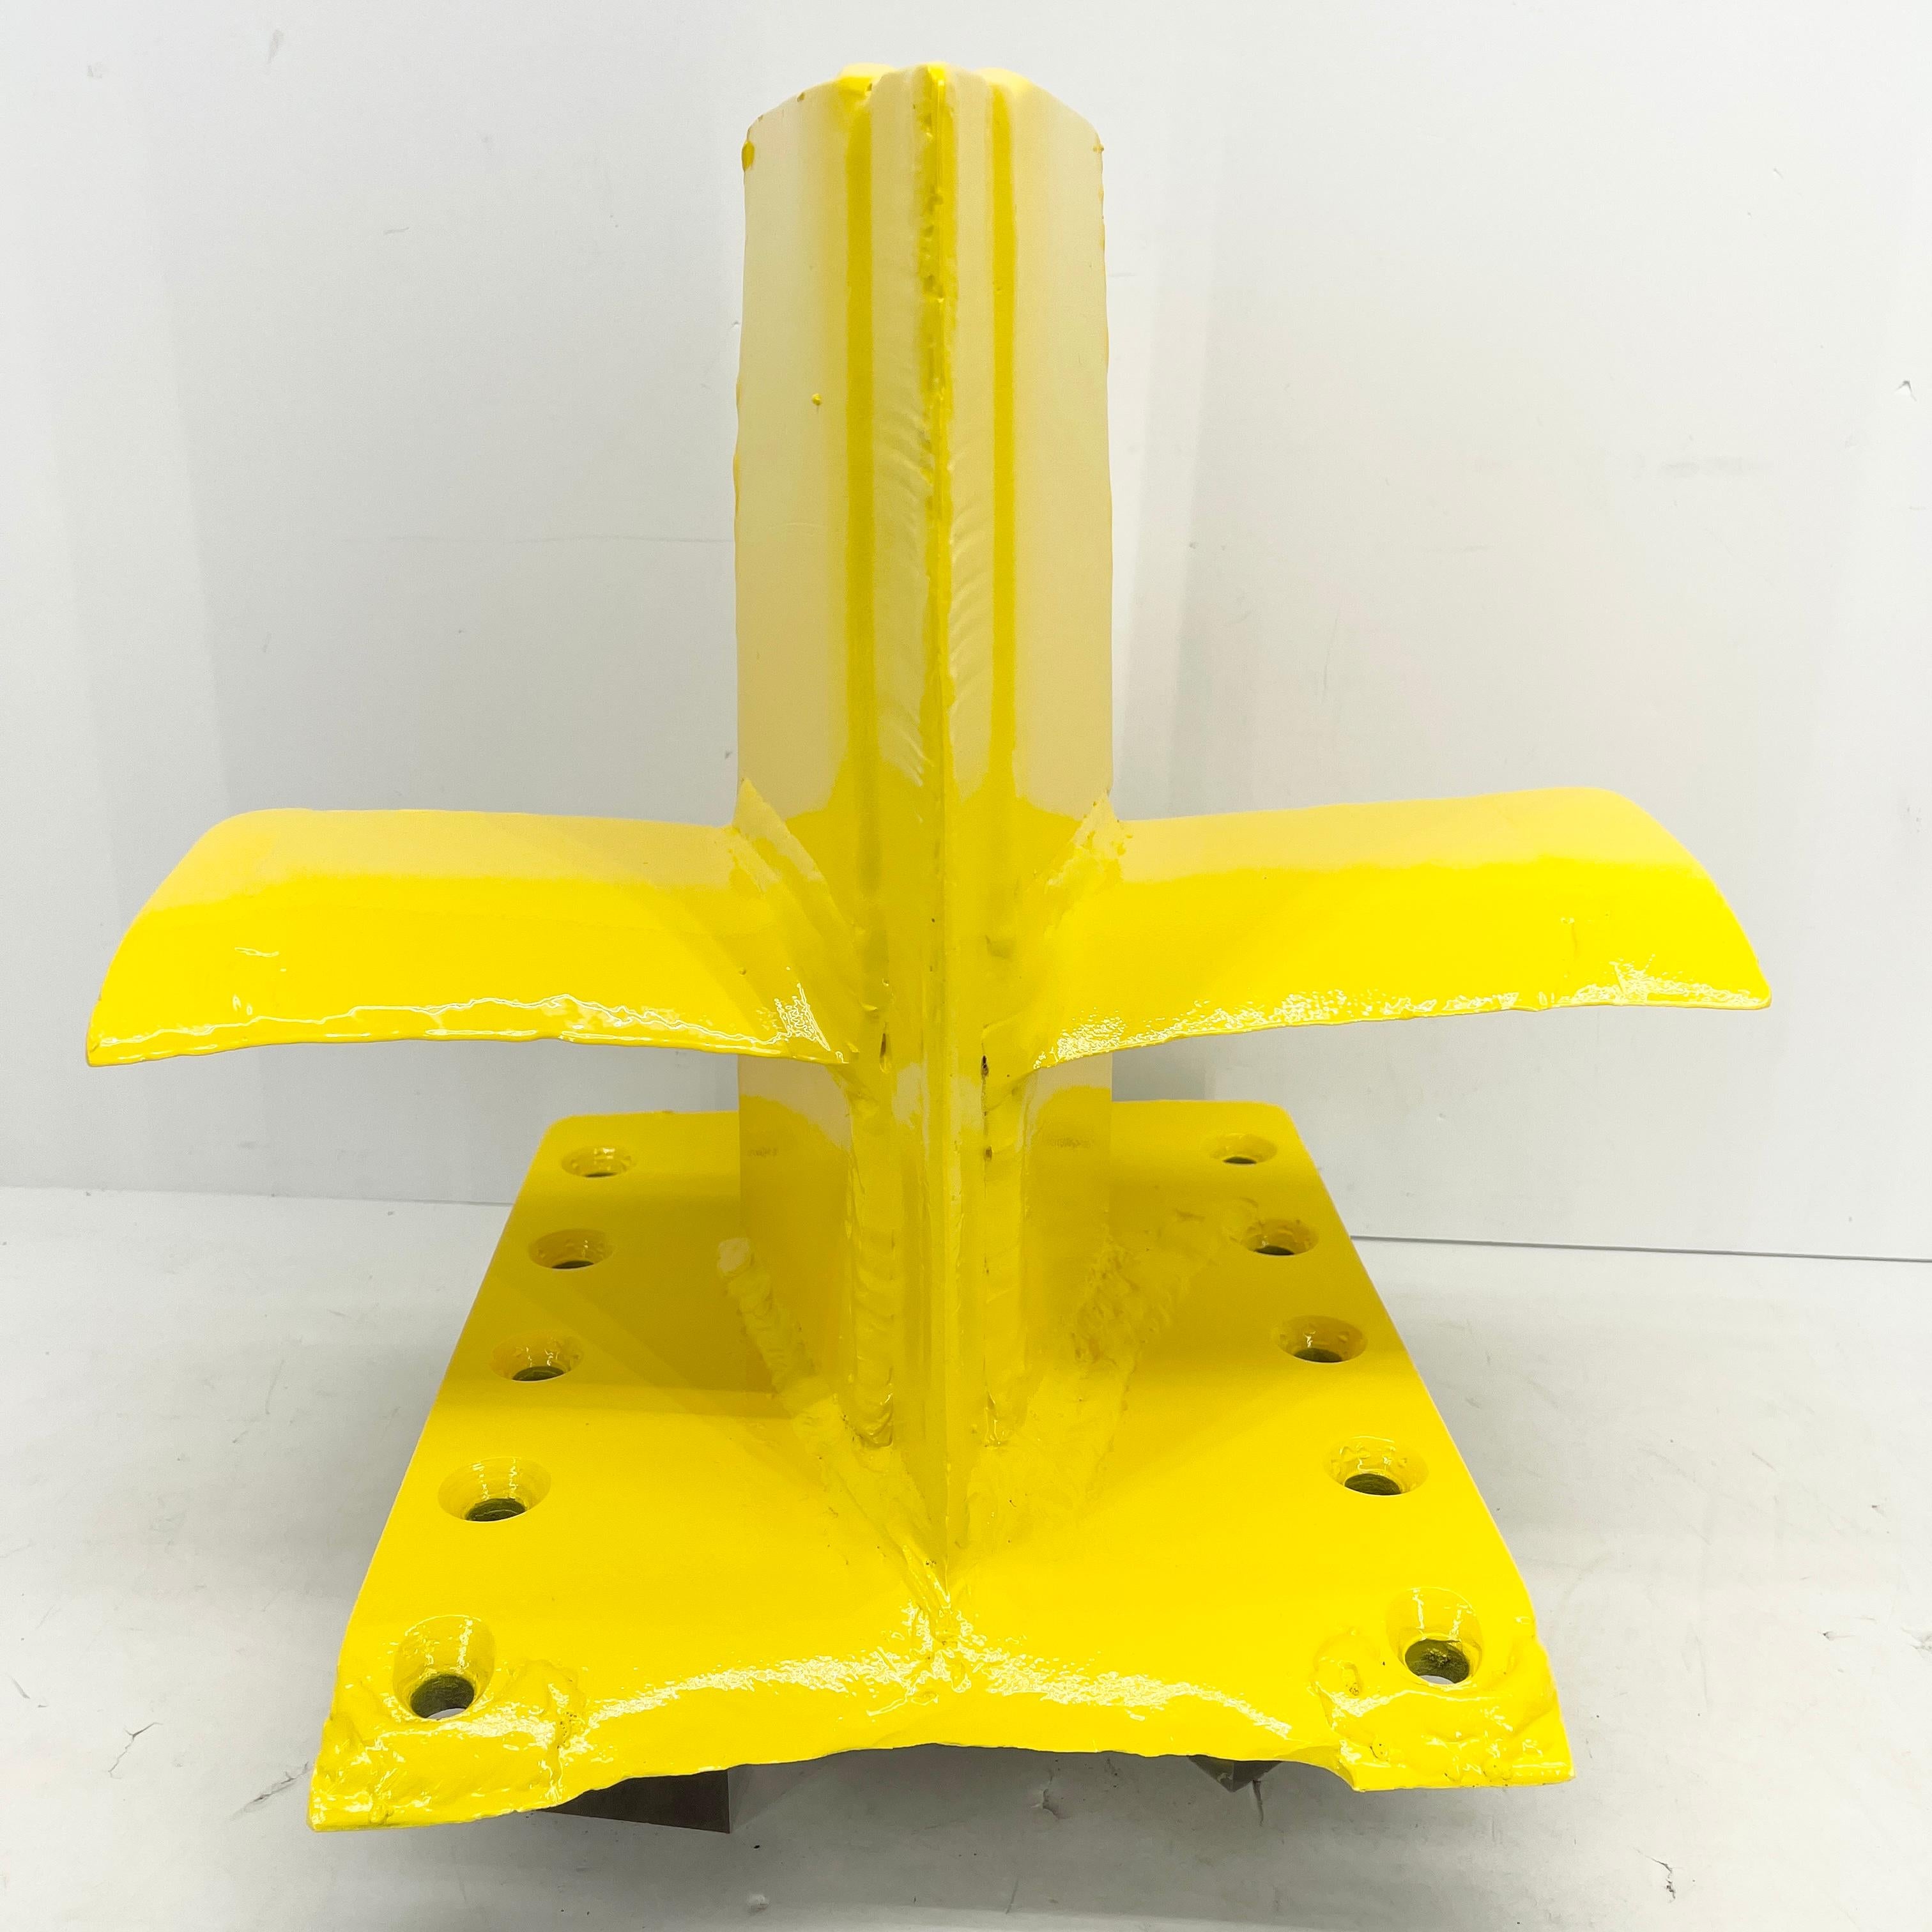 Mid-20th Century Bright Sunshine Yellow Abstract Eagle Head Sculpture From a 3 Way Wood Splitter For Sale